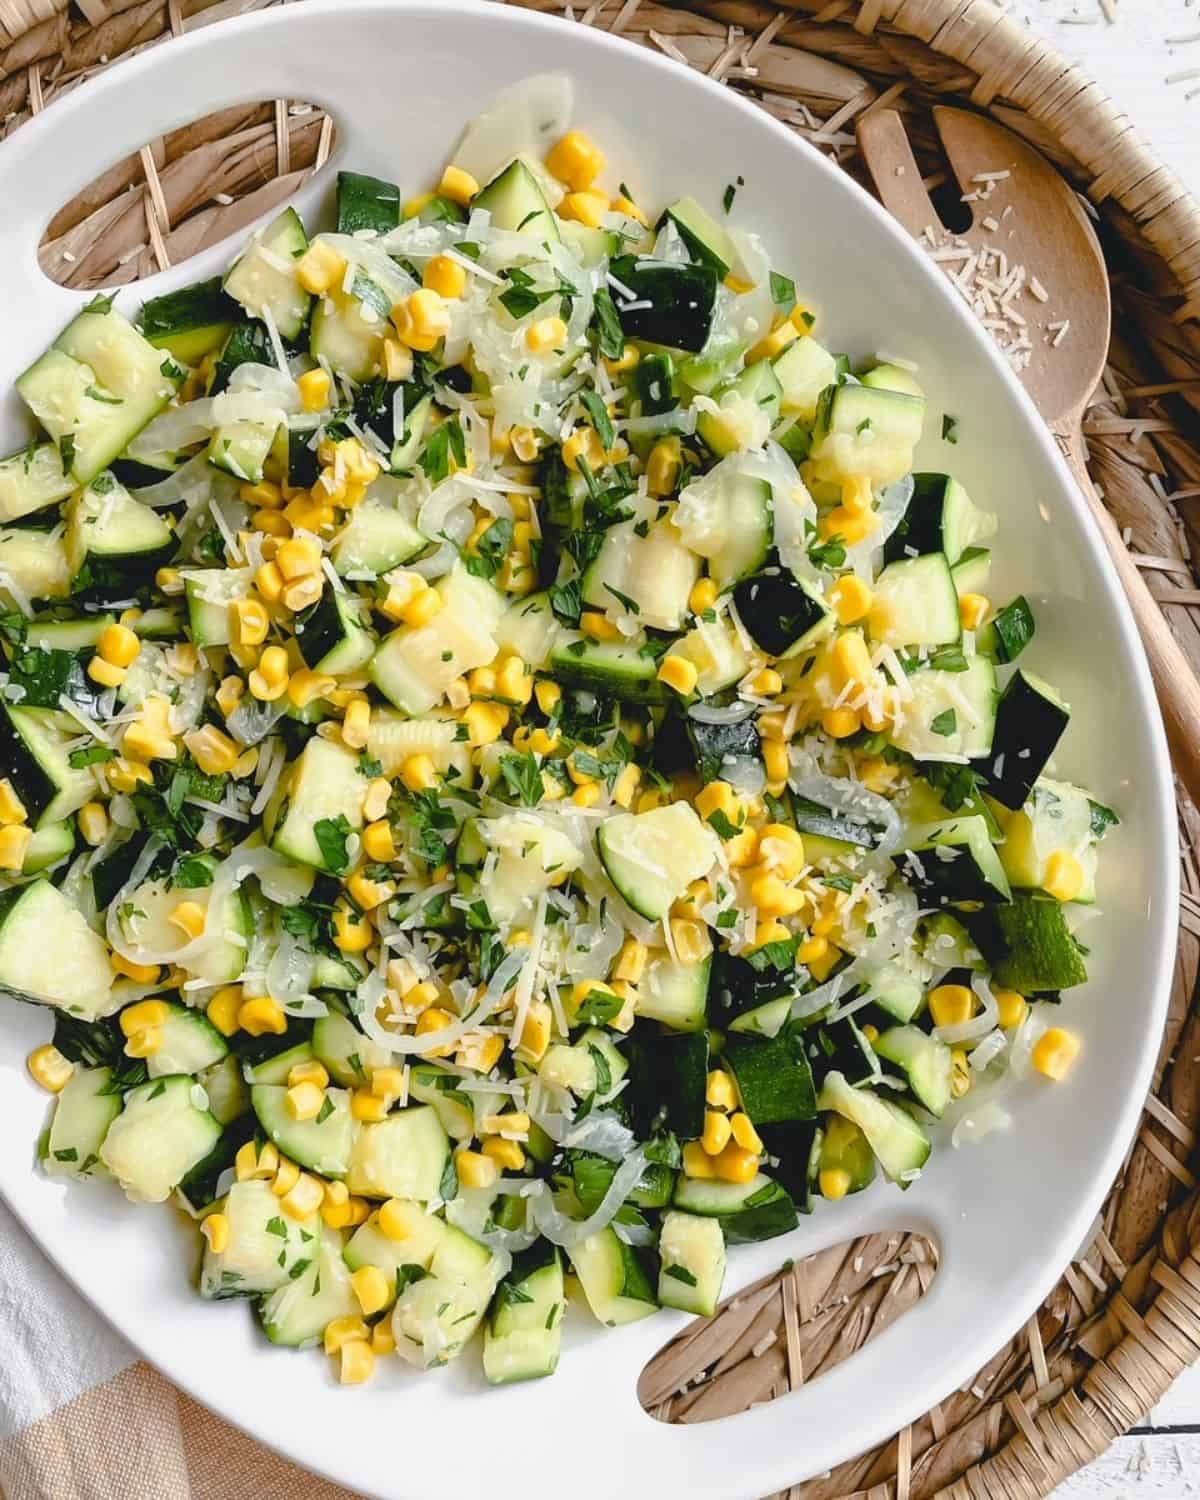 sautéed zucchini and onions with sweet corn in a round white serving bowl on  a basket with a large wooden spoon